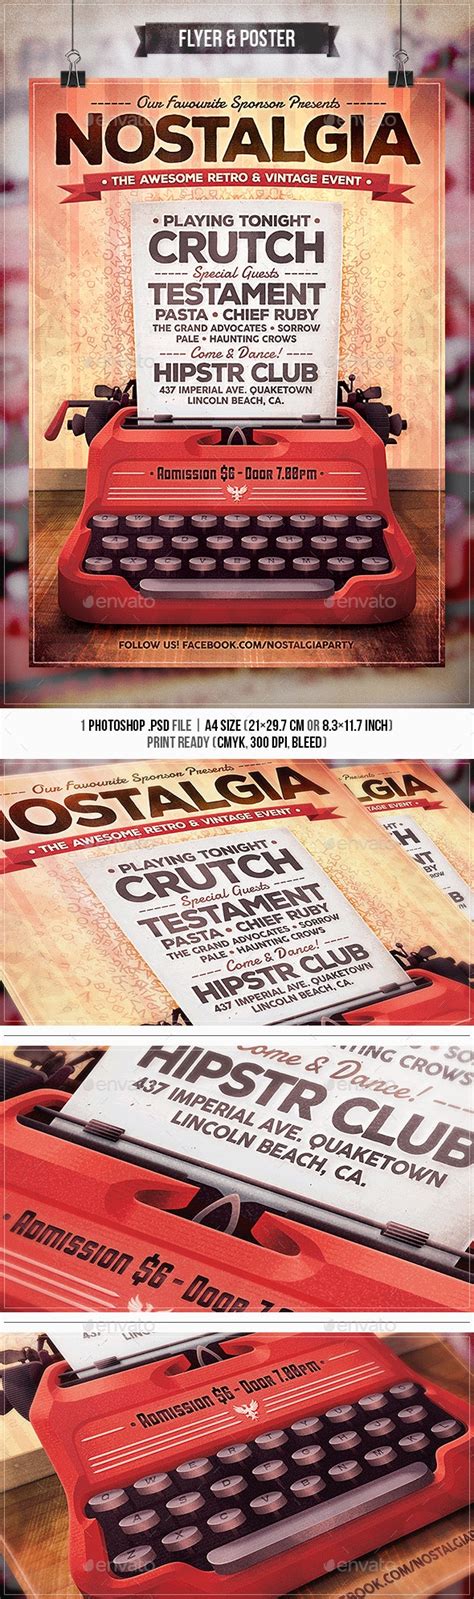 Nostalgia Flyer And Poster Print Templates Graphicriver